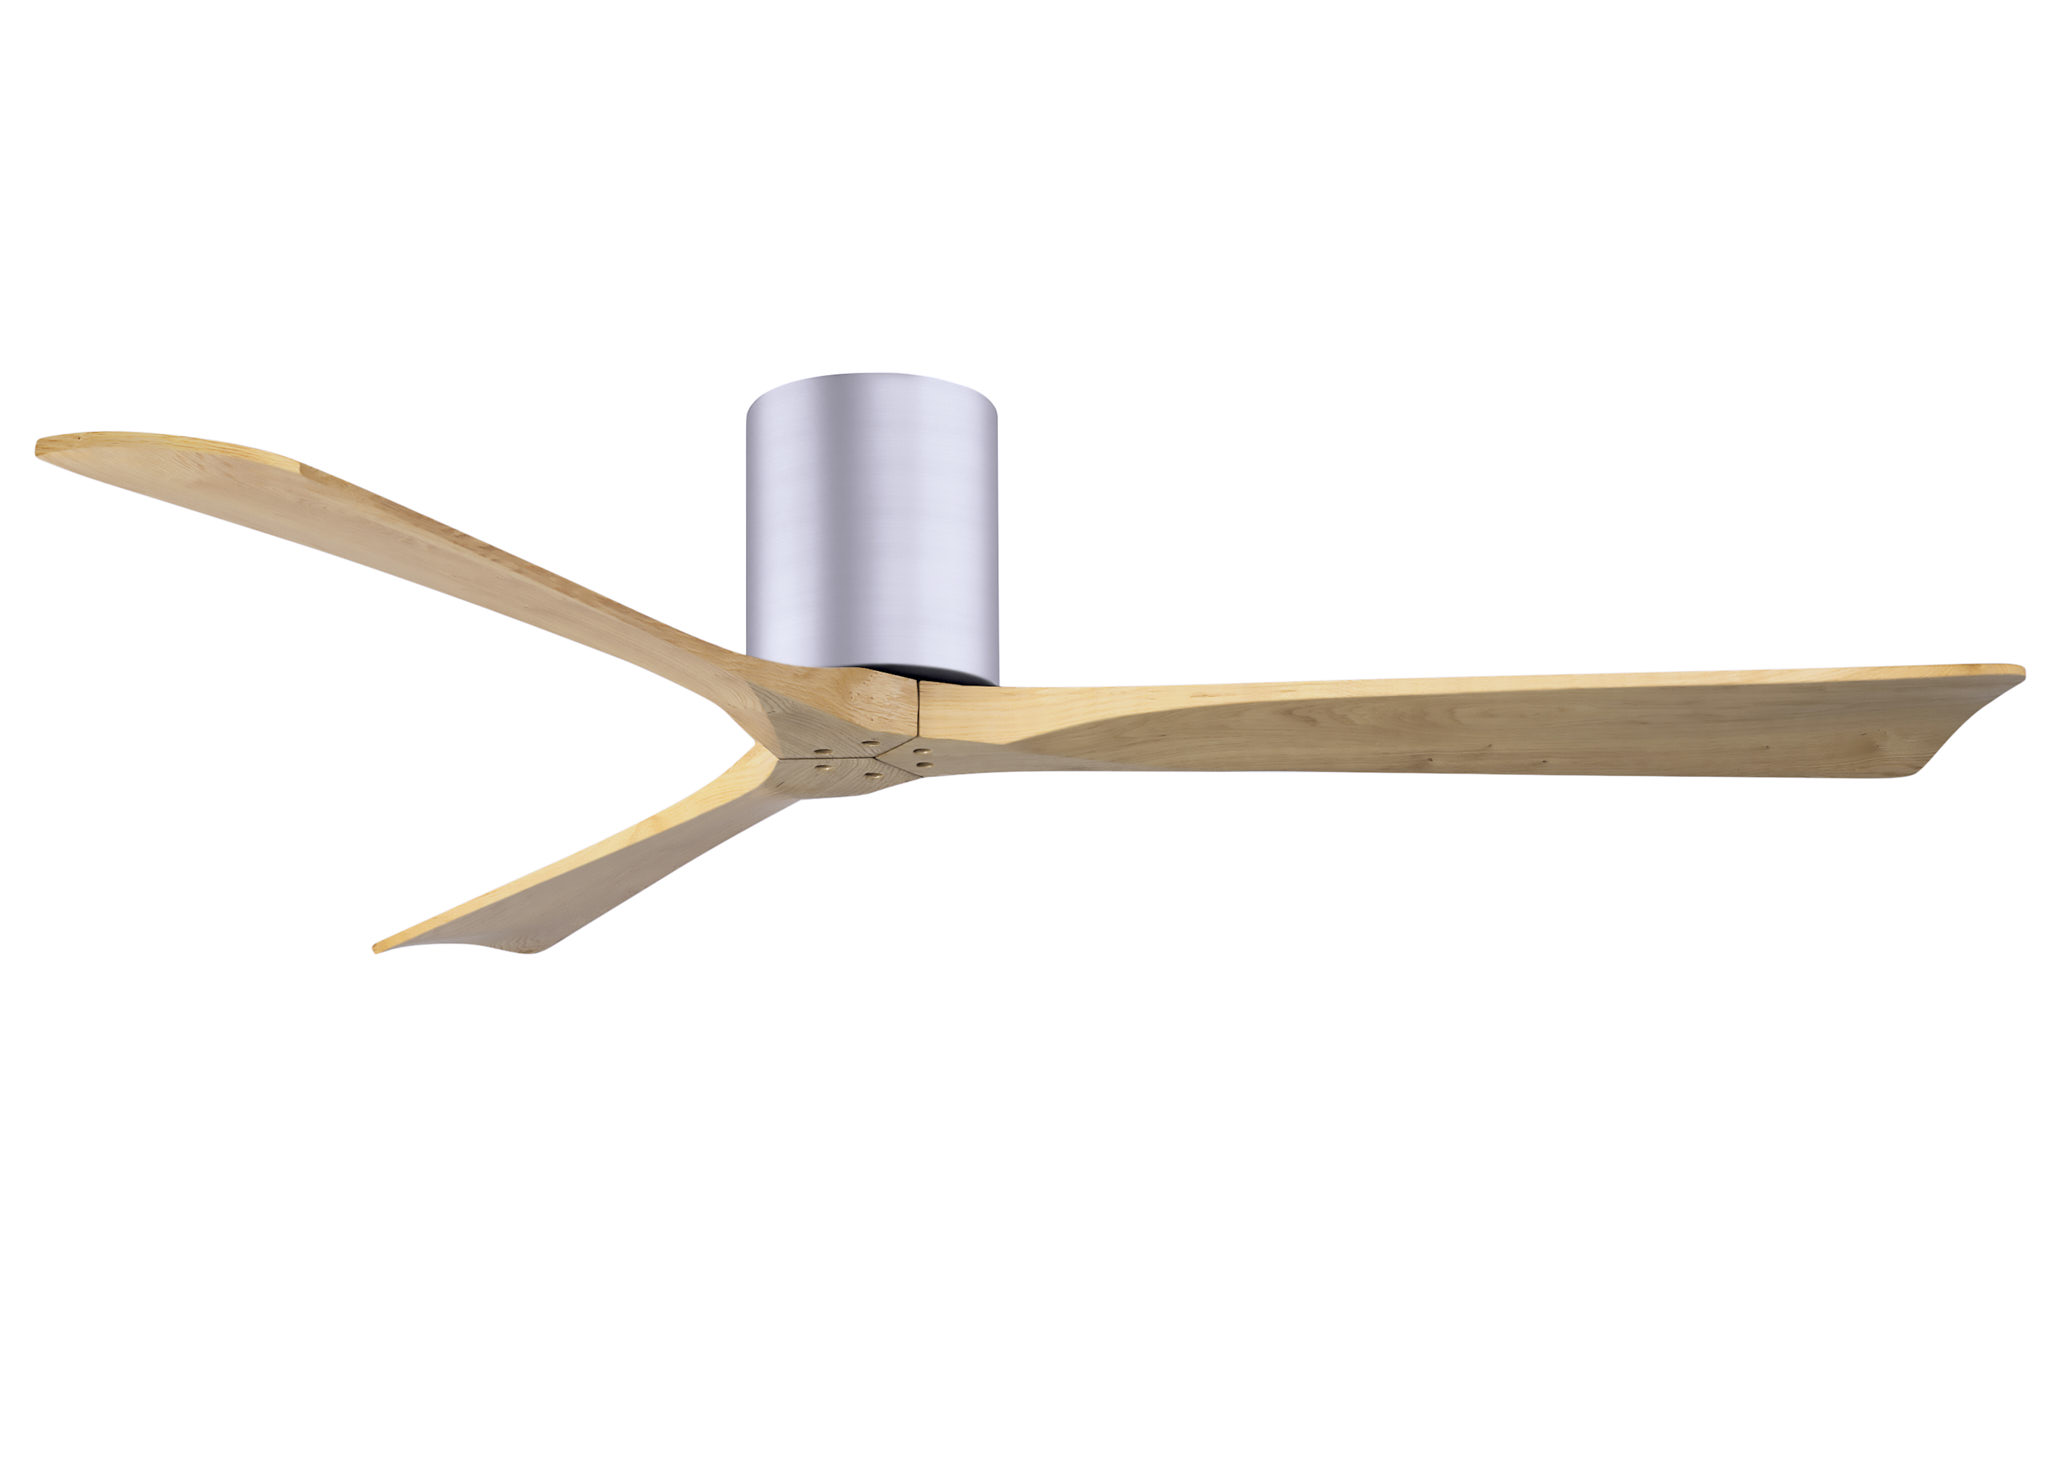 Irene-3H 6-speed ceiling fan in brushed nickel finish with 60